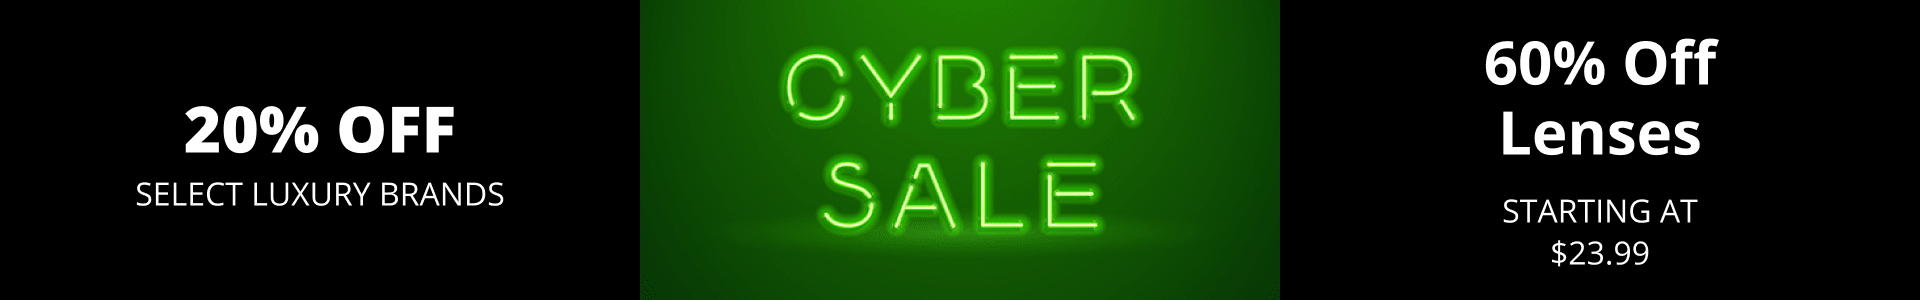 Save 20% on Select Luxury Brands during our Cyber Sale